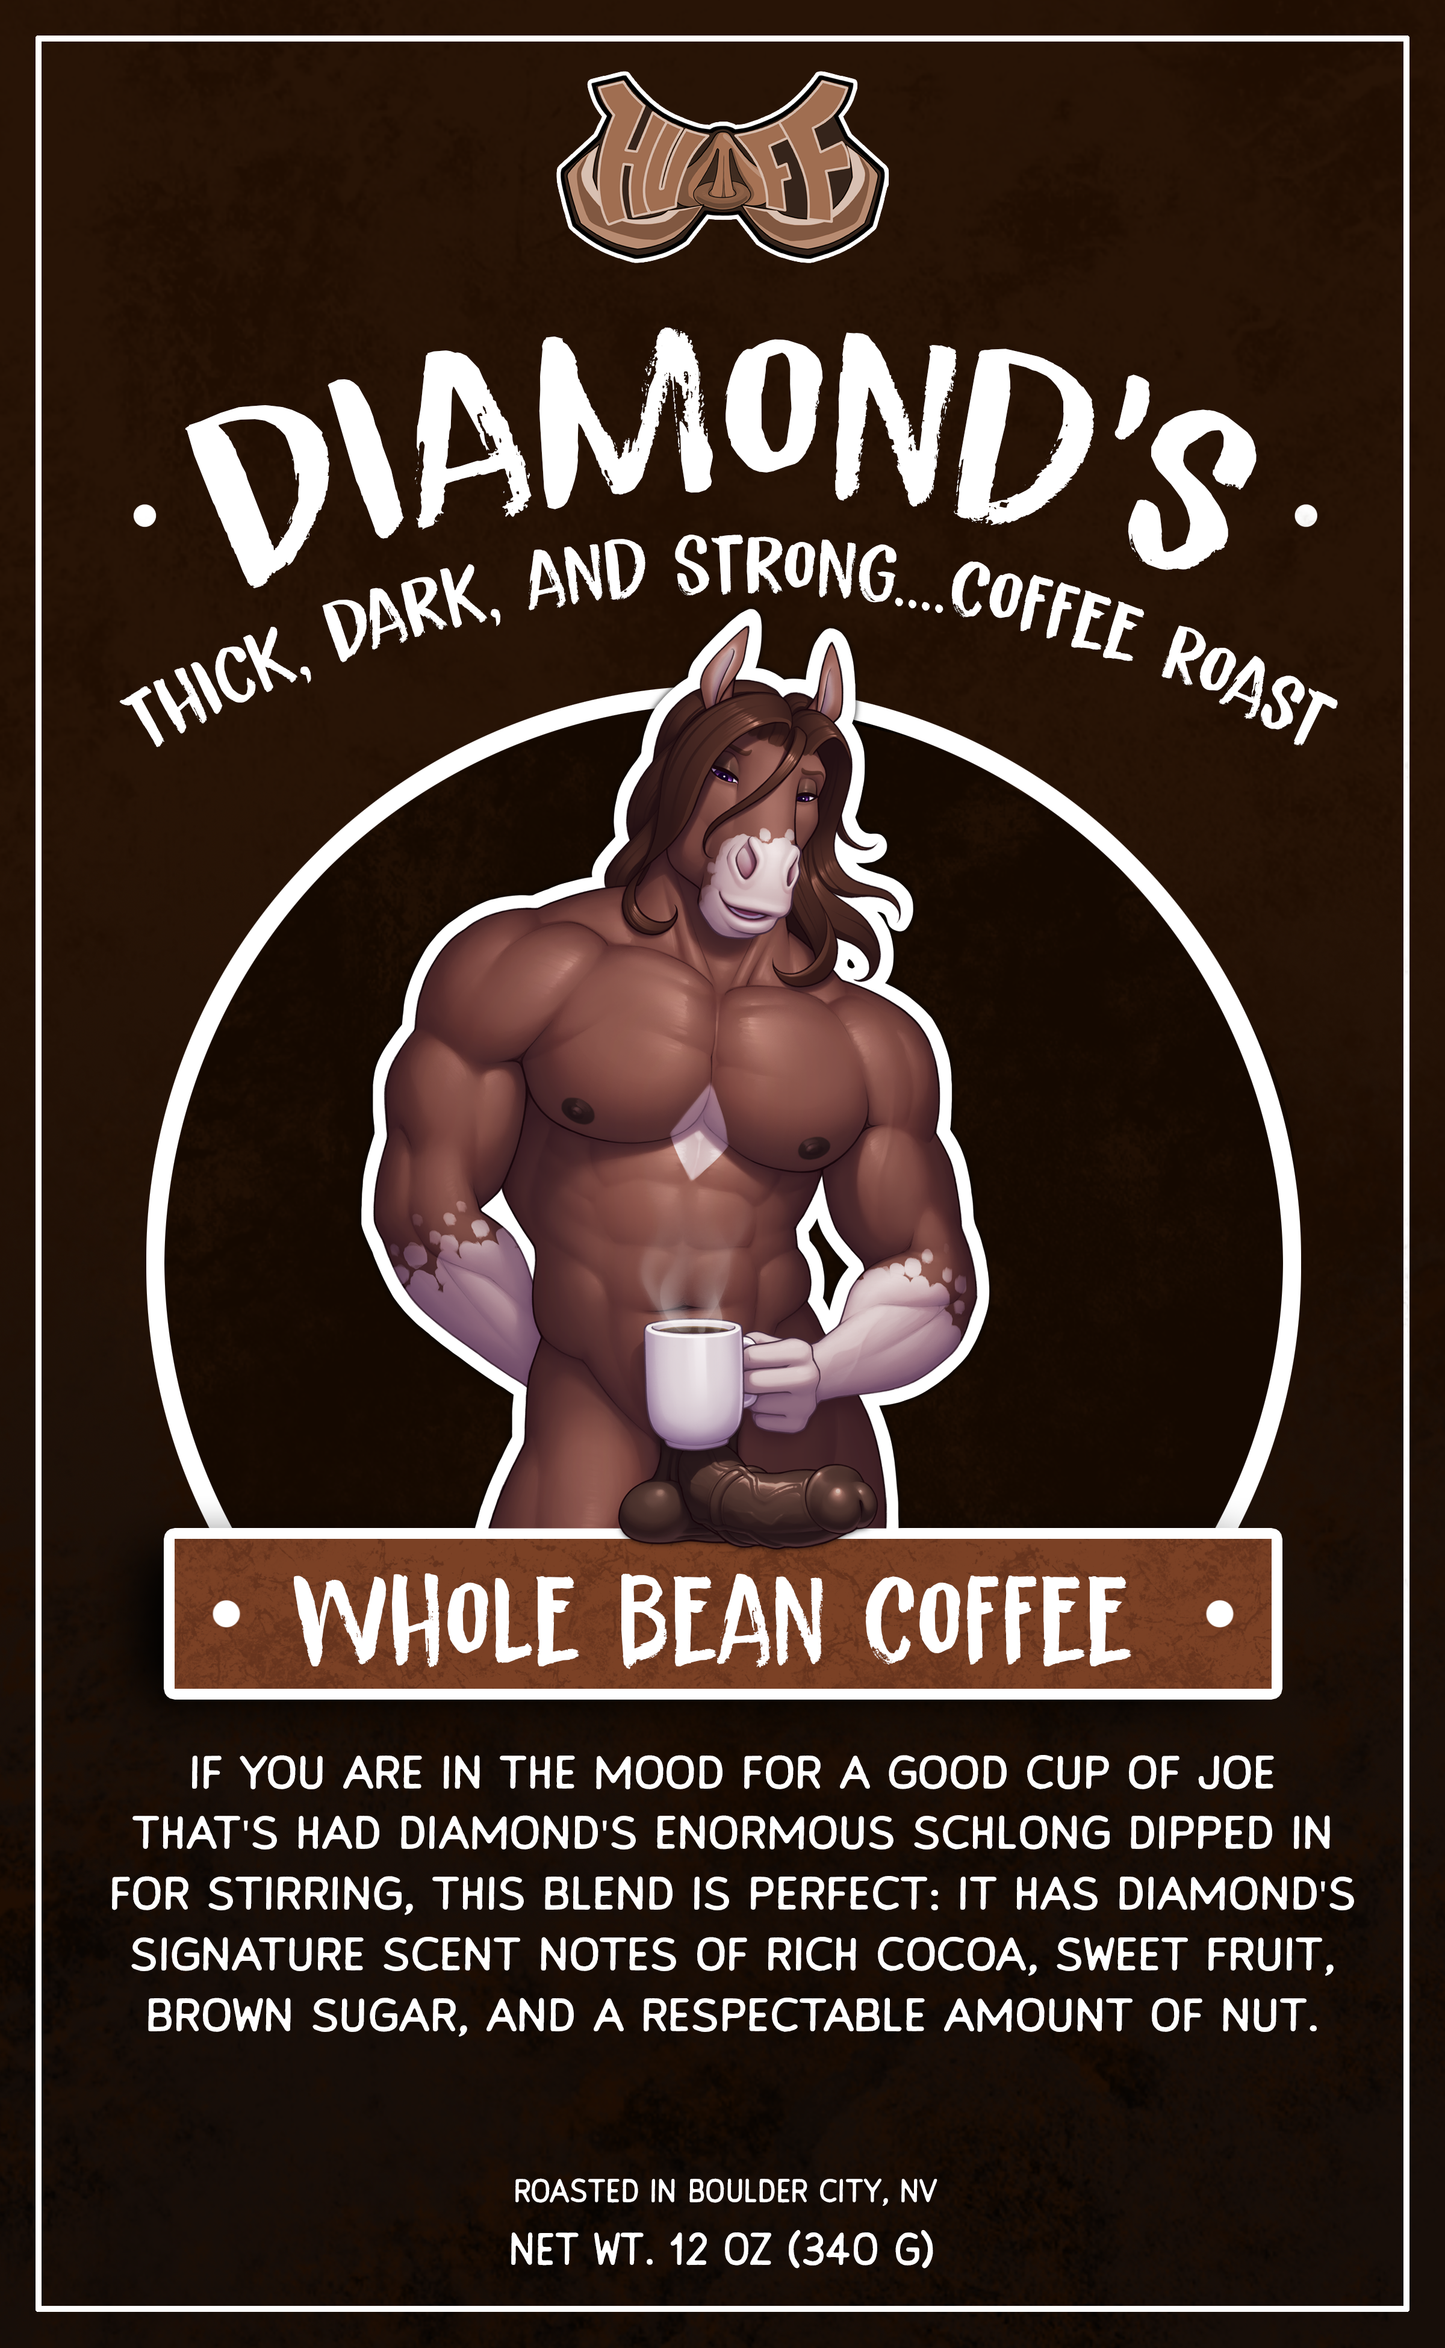 Diamond's Thick, Dark, and Strong...Coffee Roast - PREORDER